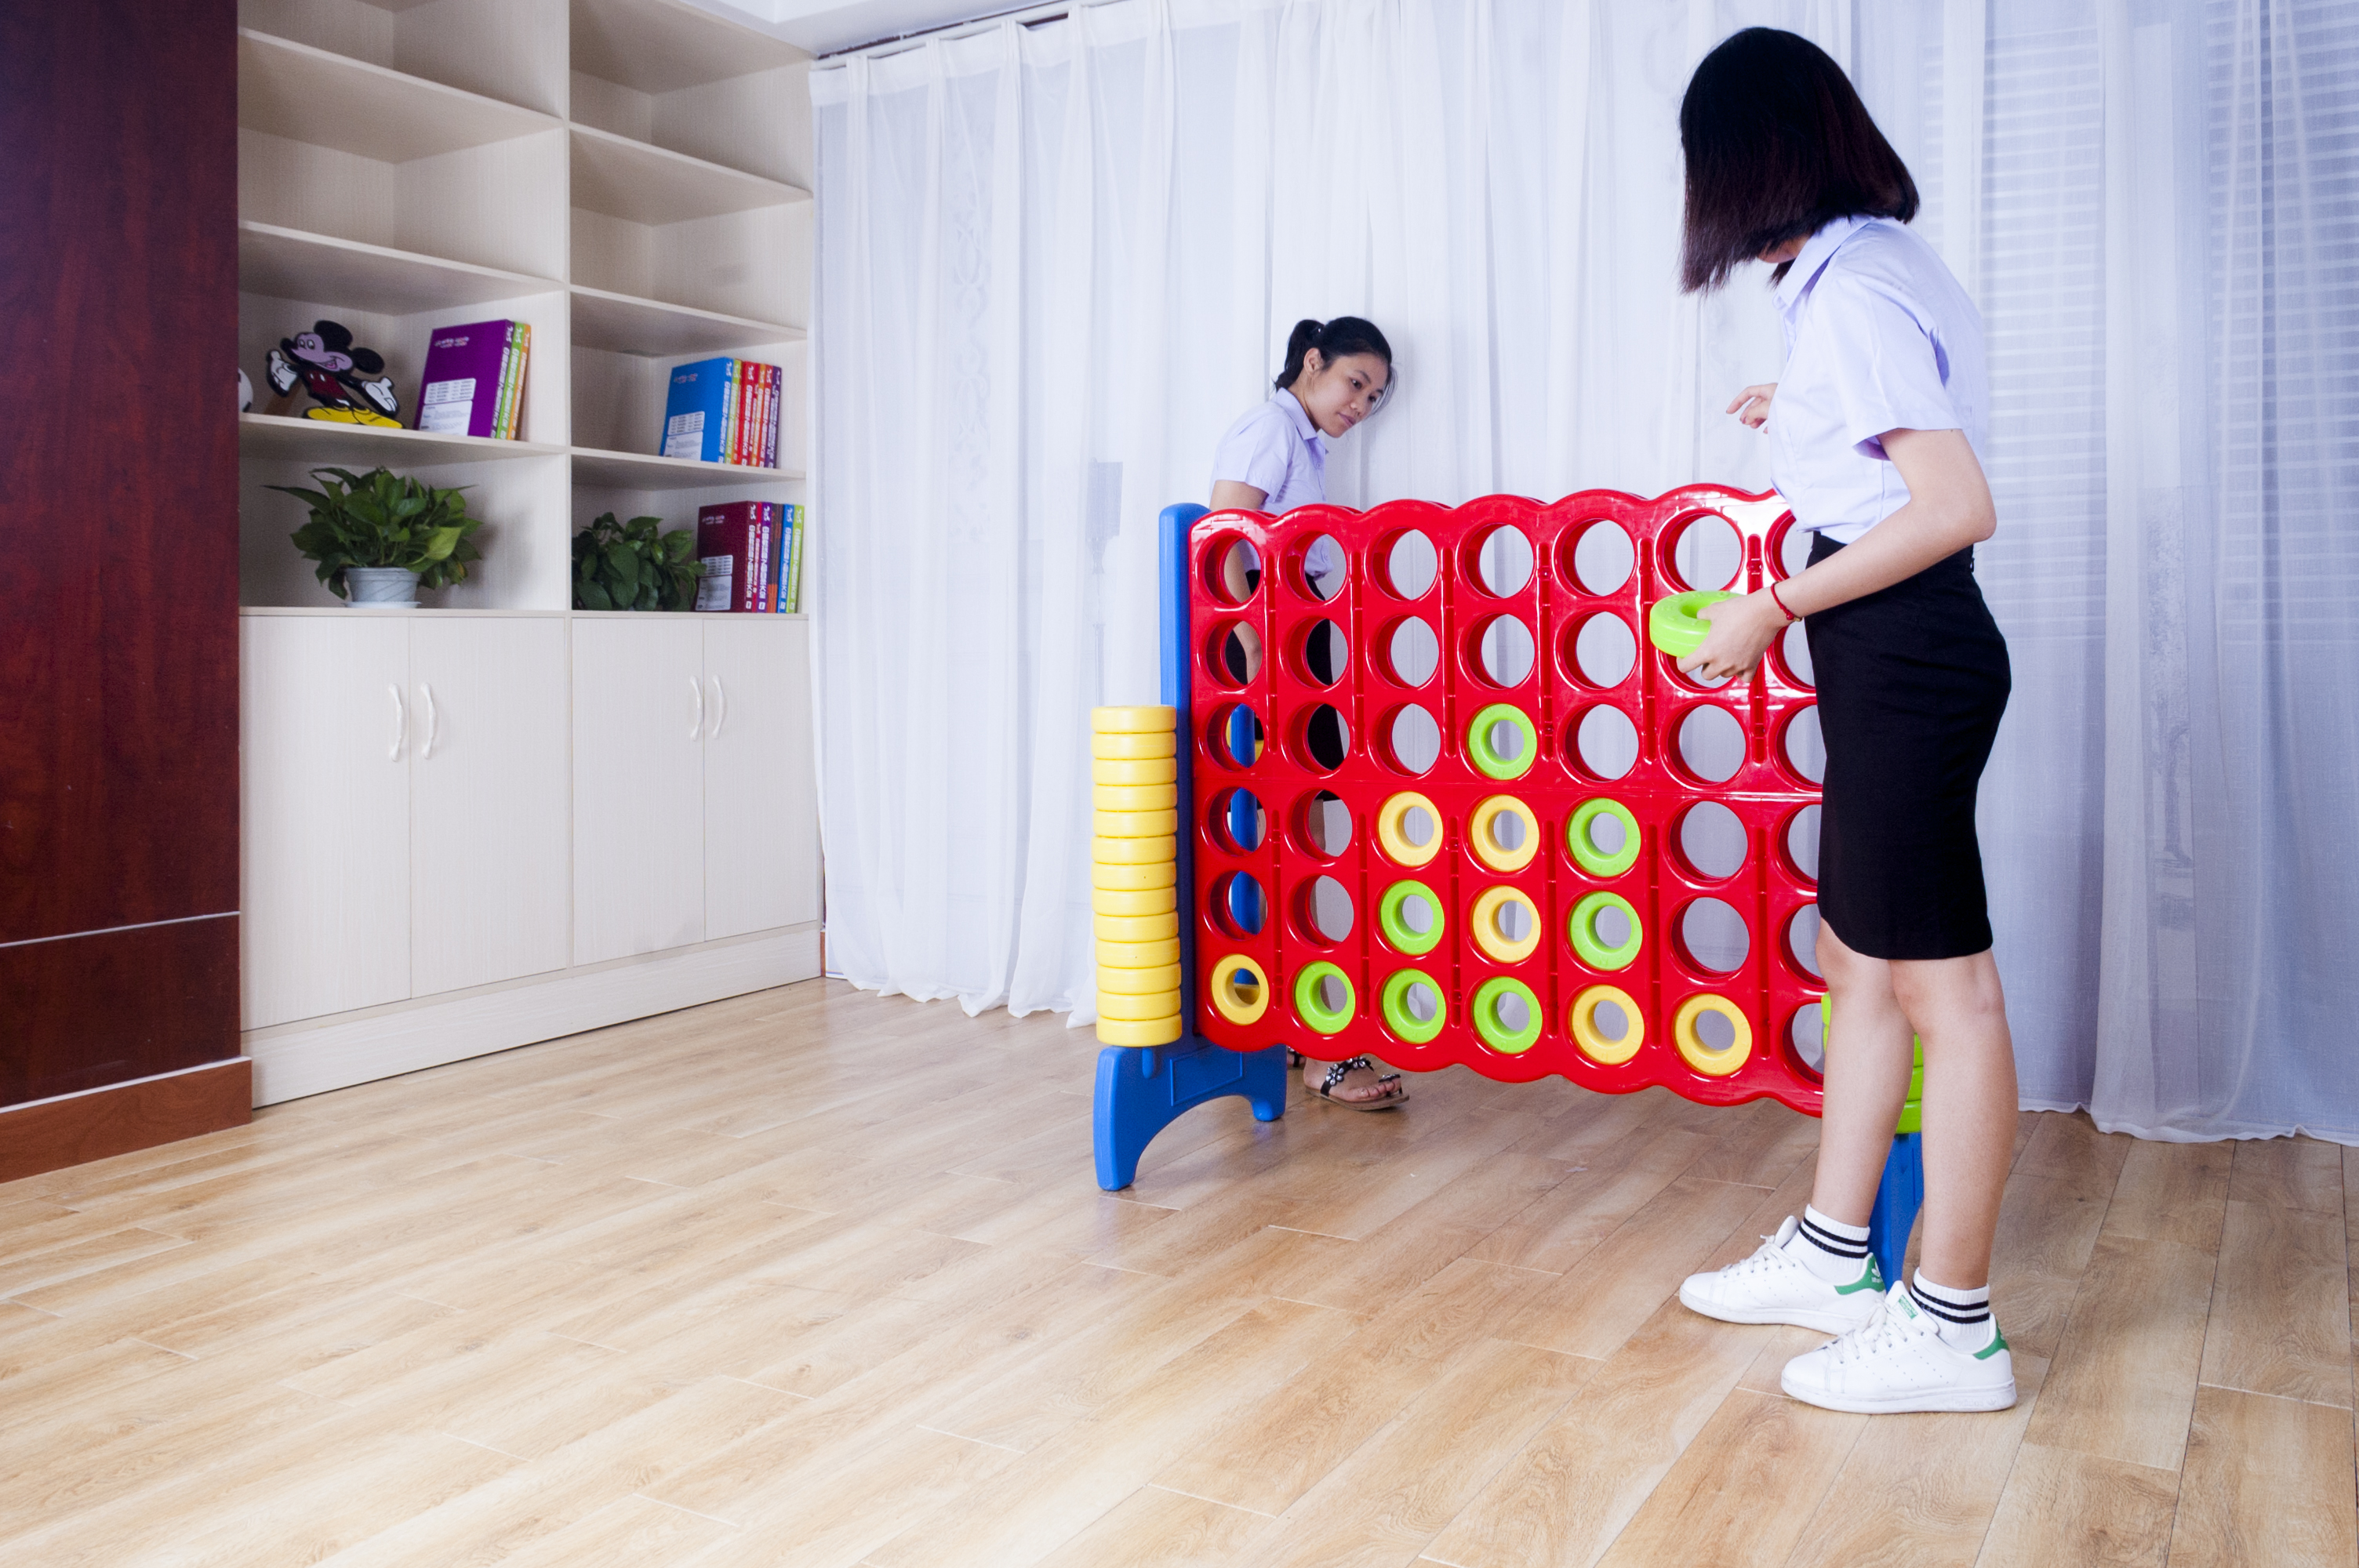 Bettaplay Giant connect 4